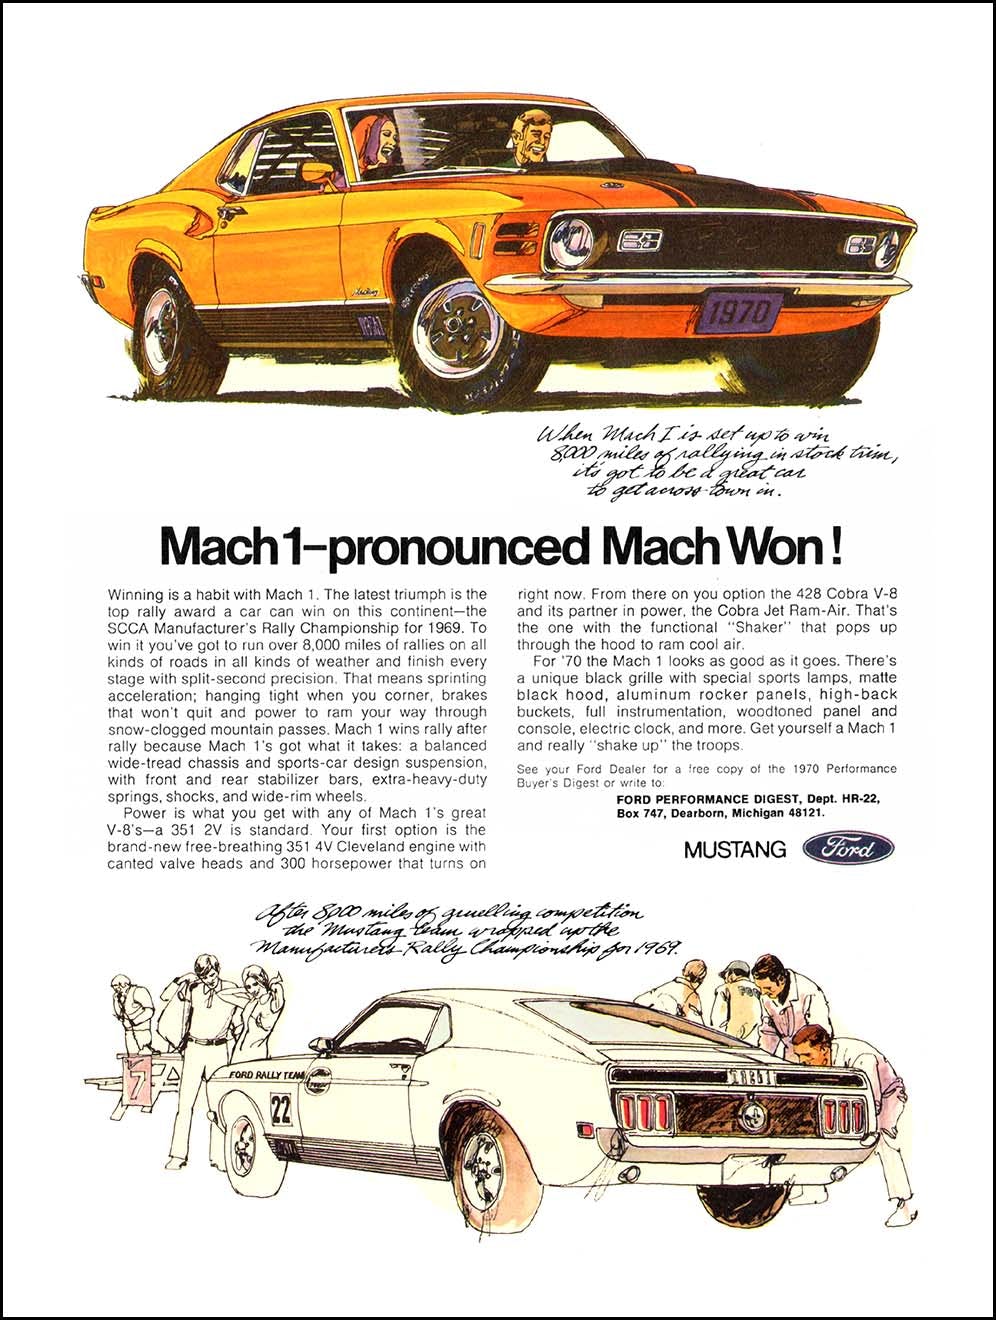 1966 ford mustang mach 1 advertisement